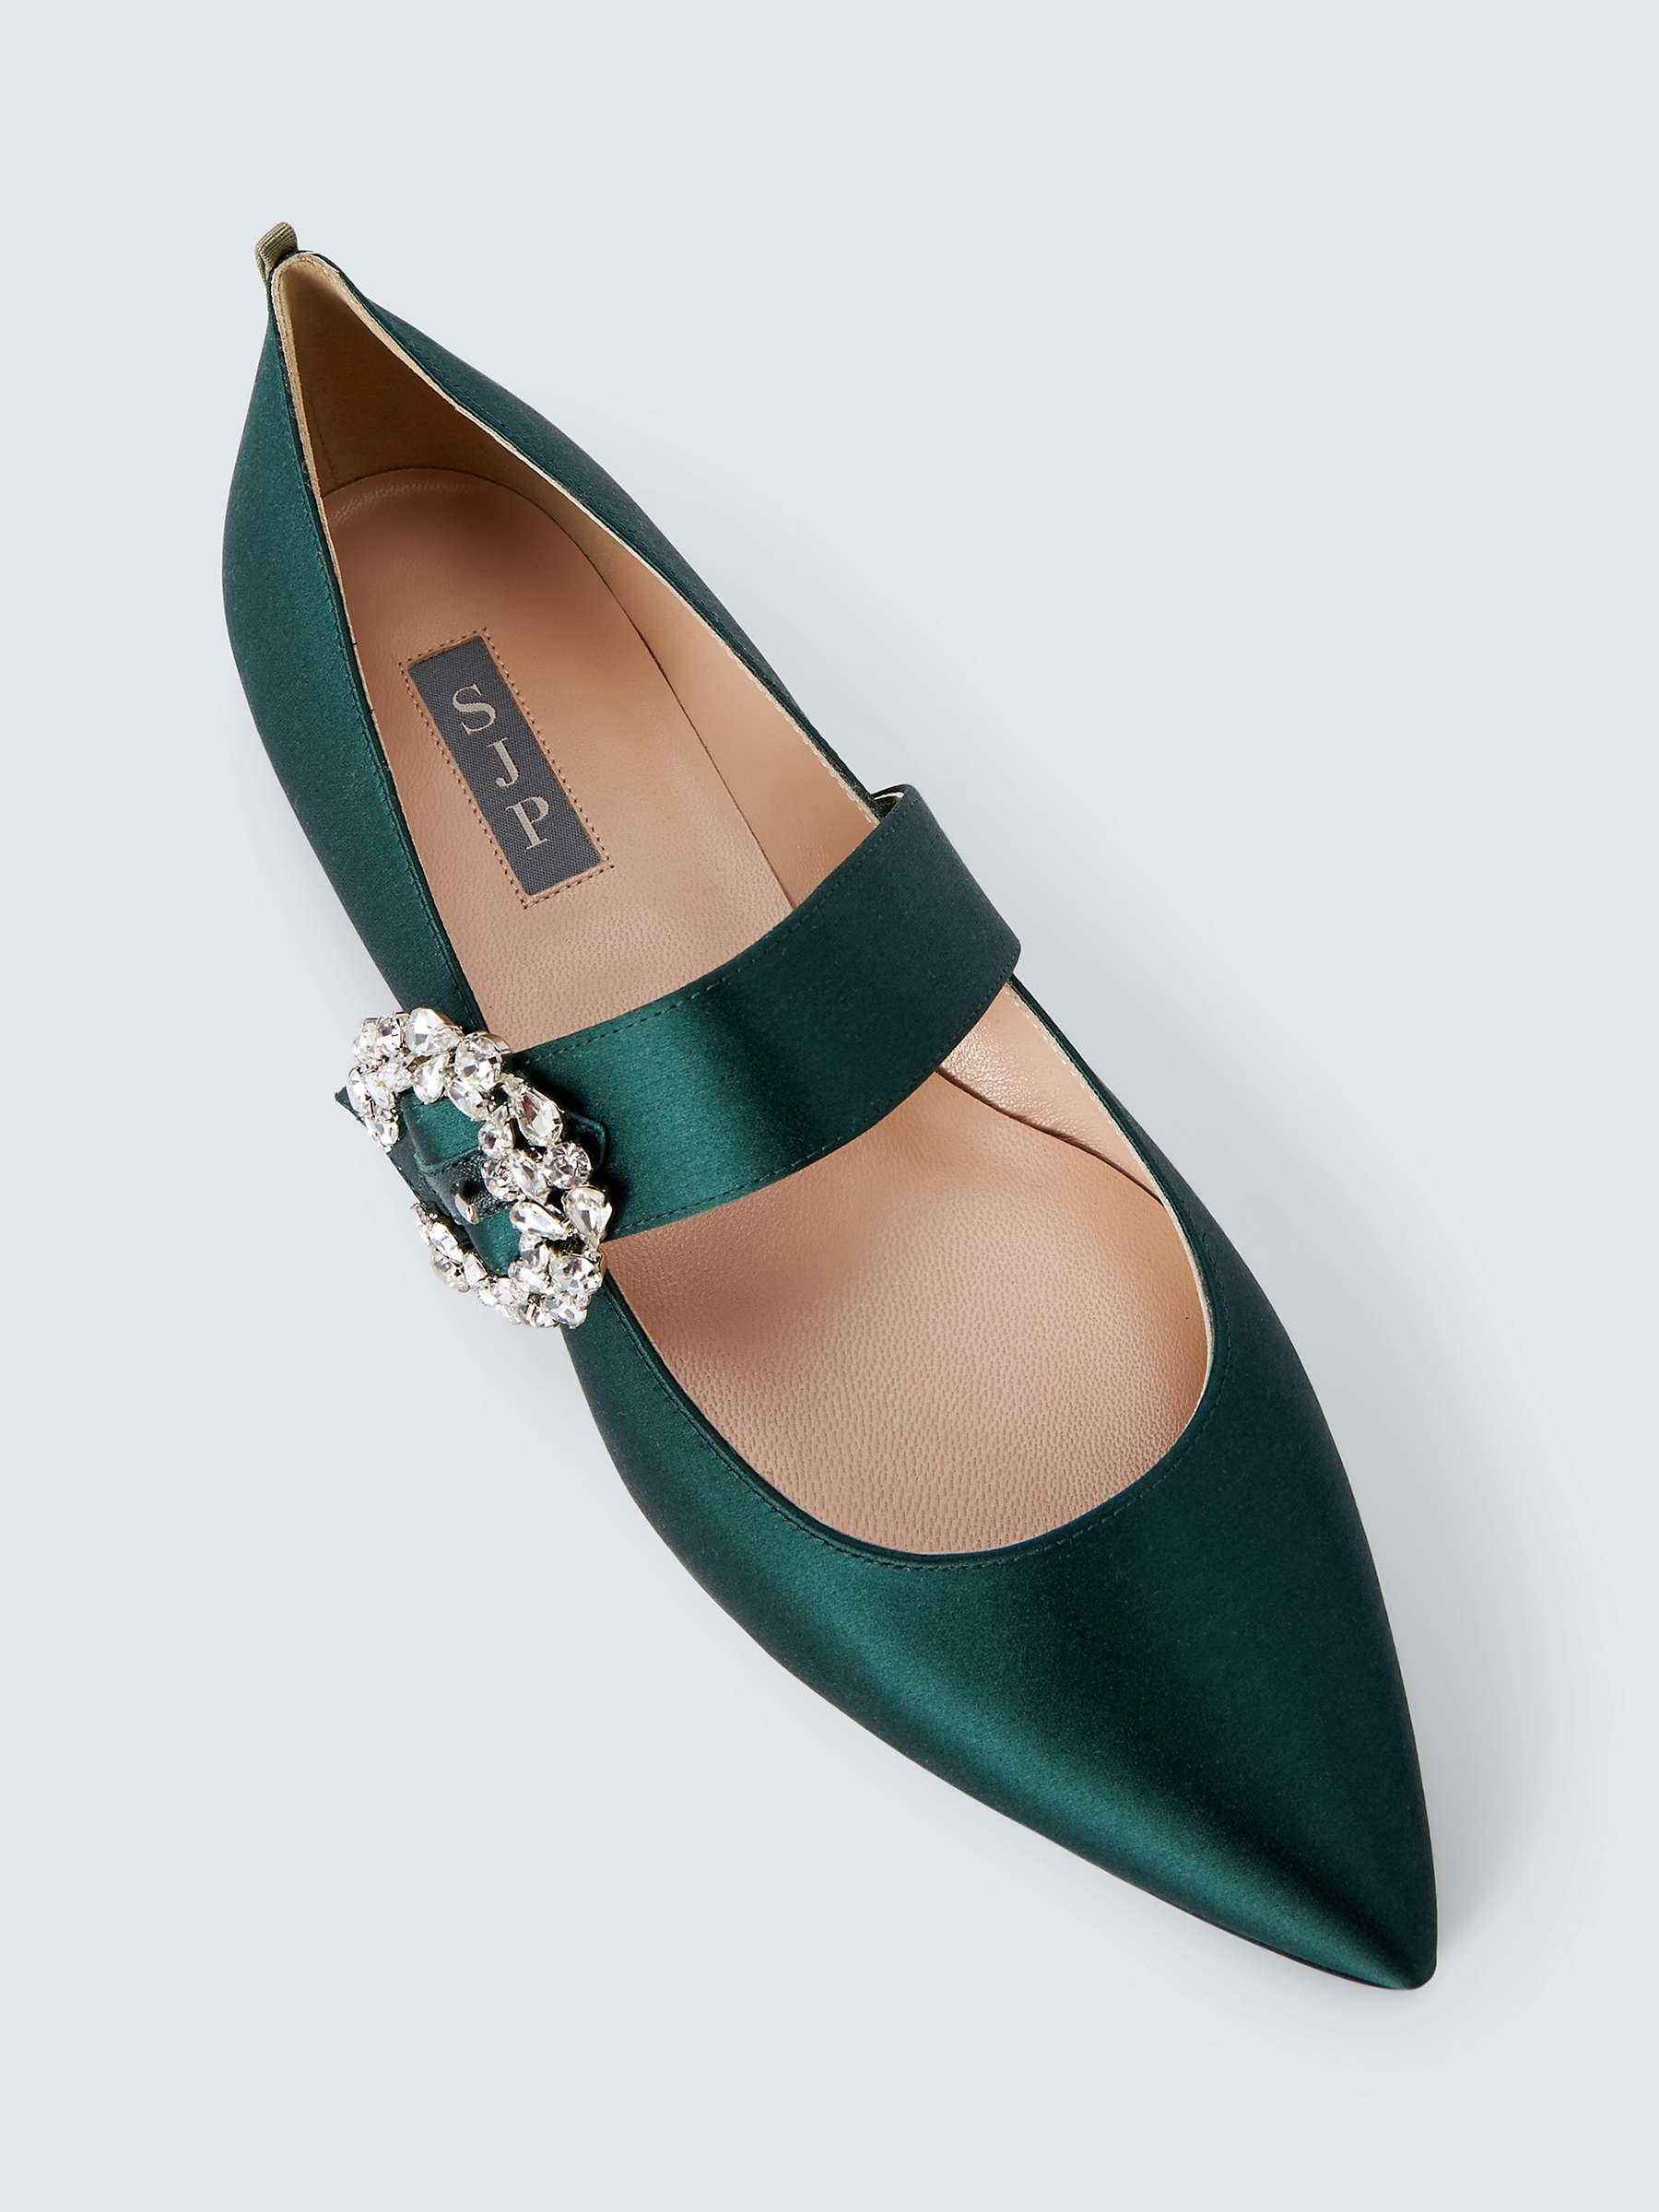 Buy SJP by Sarah Jessica Parker Chime Satin Pointed Mary Jane Flats, Jungle Online at johnlewis.com